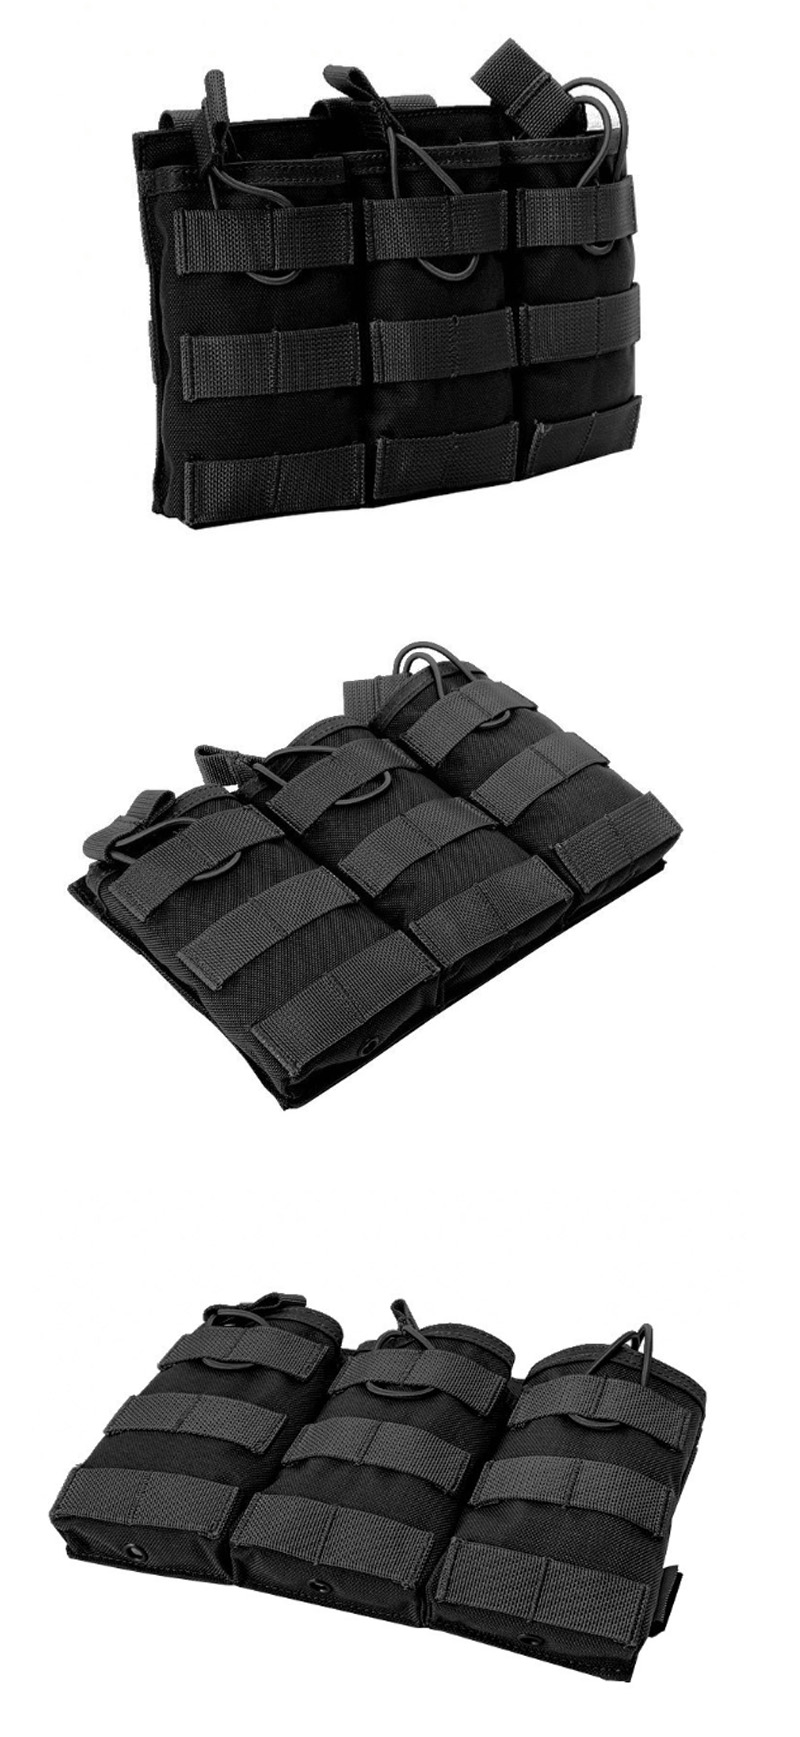 ZANLURE-1000D-Nylon-Molle-Tactical-Bag-Triple-Magazine-Pouch-For-Camping-Hunting-1556491-2